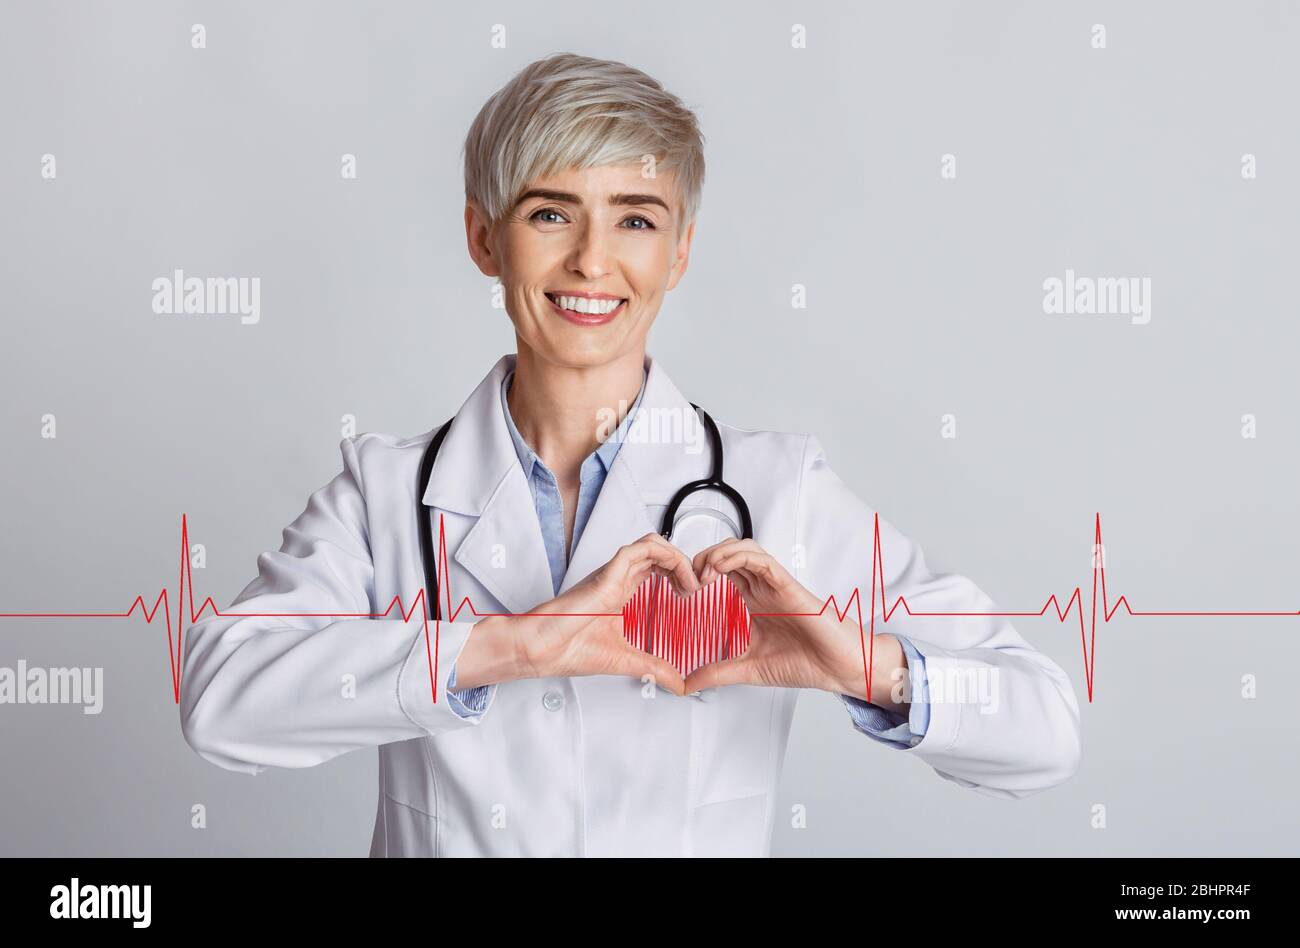 Cardiology concept. Female doctor showing heart with her hands and cardiogram on grey background, collage Stock Photo